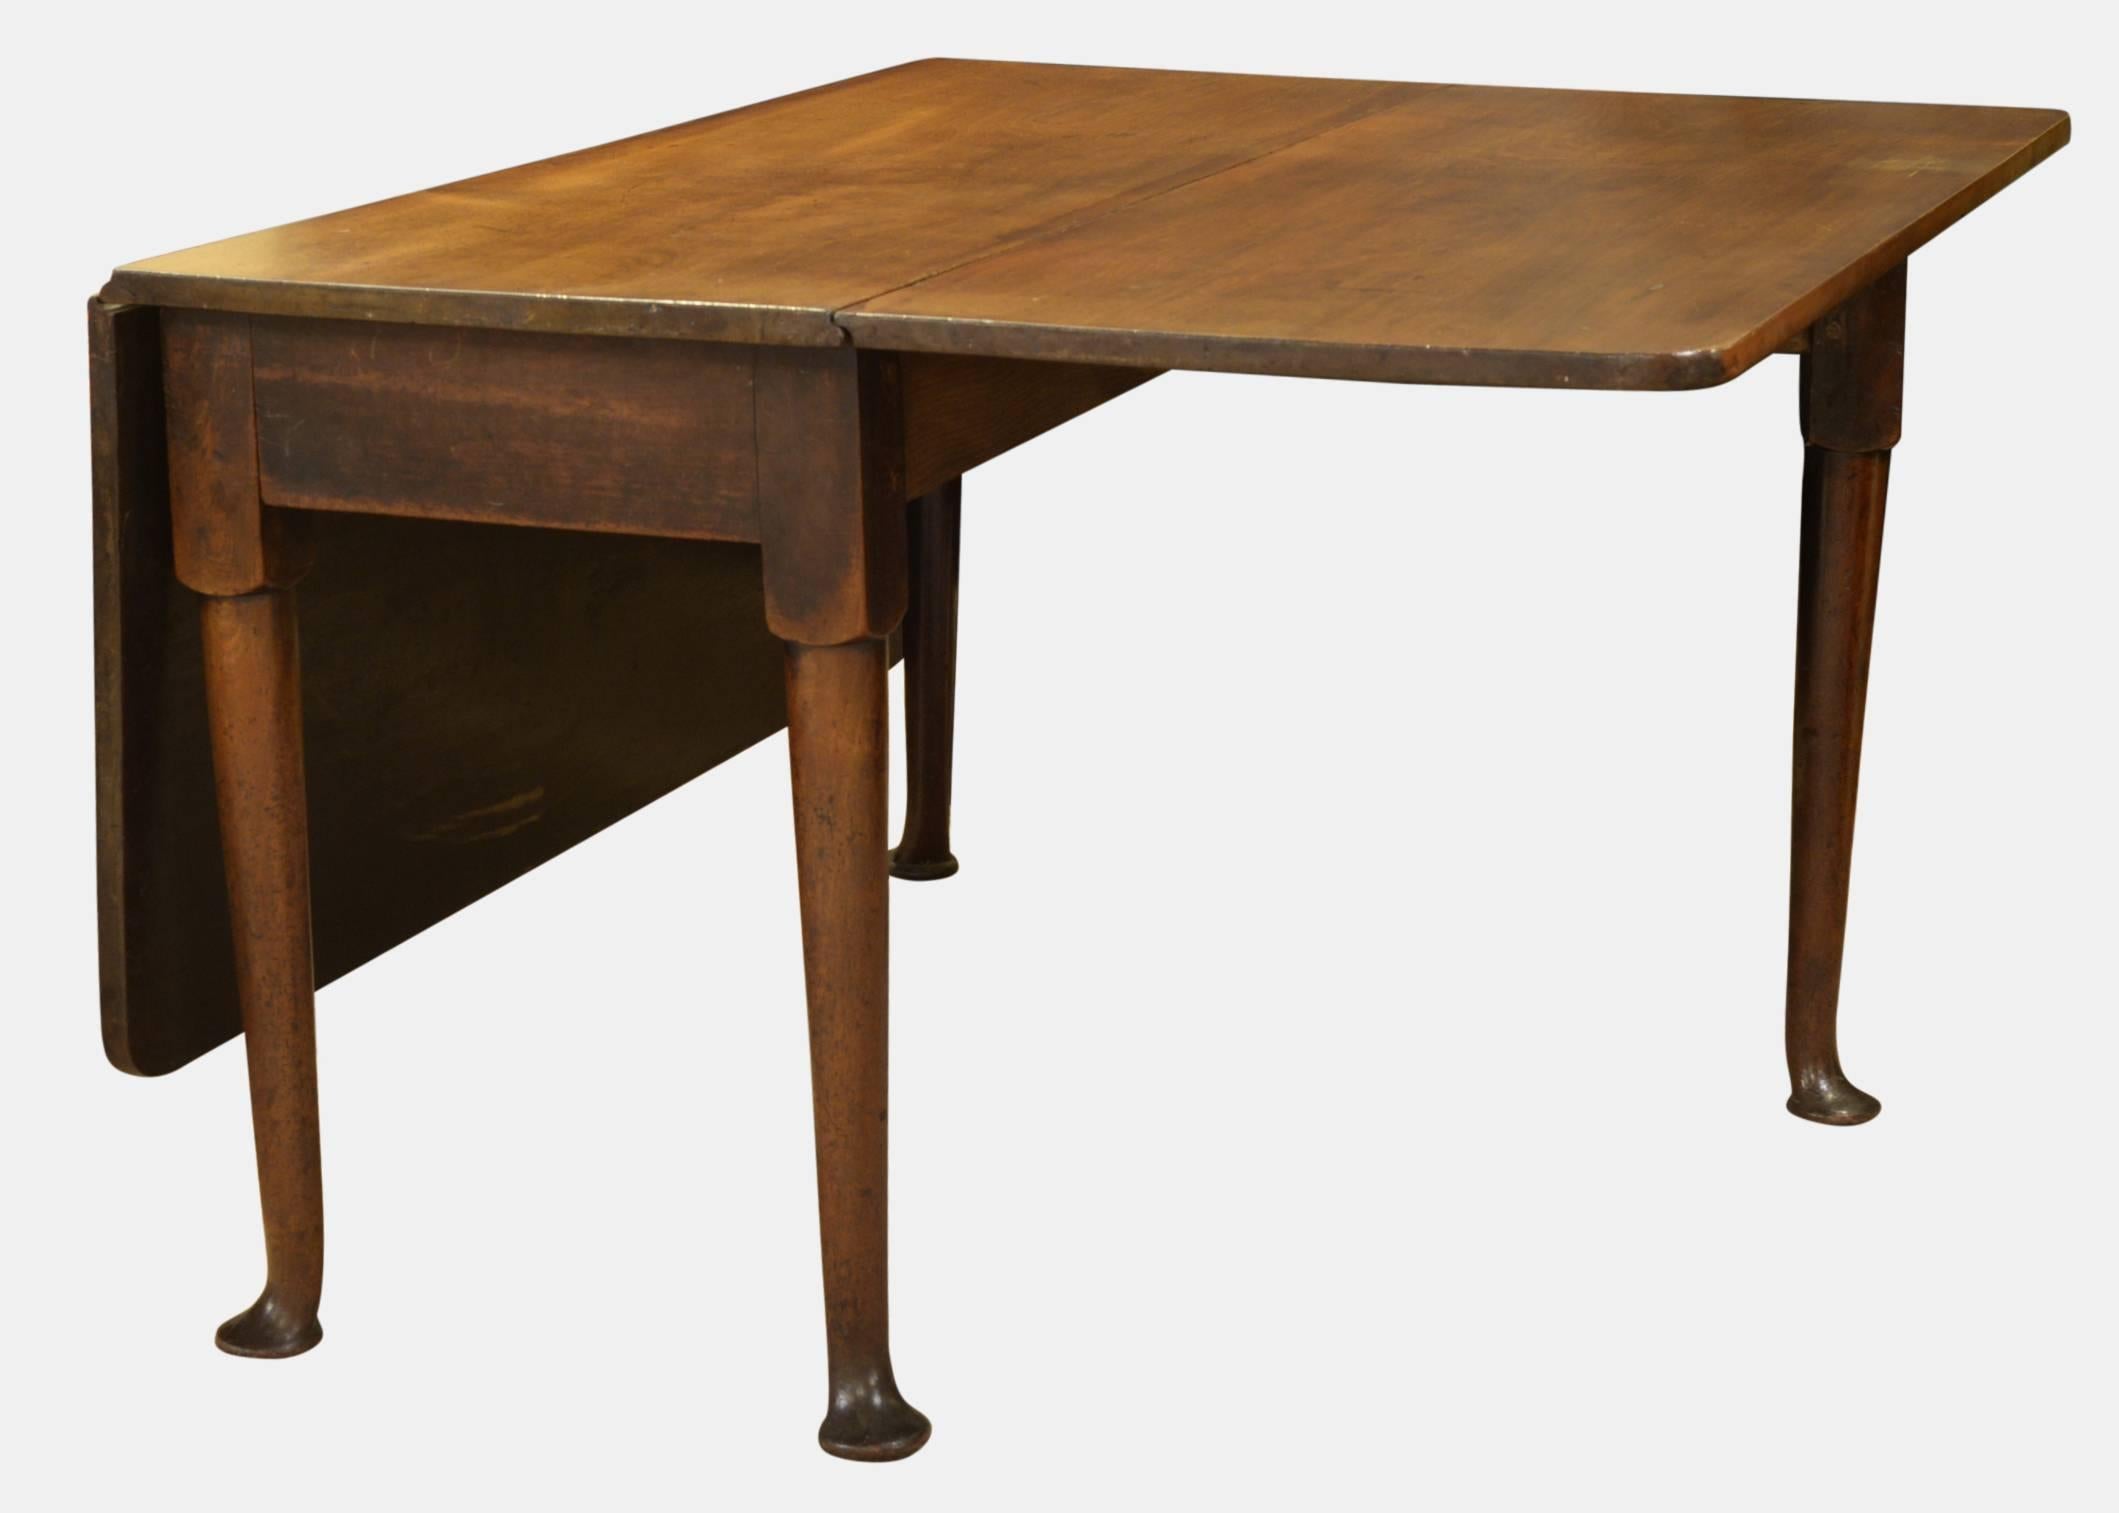 A George III mahogany drop-leaf dining table standing on straight turned legs with pad feet,

circa 1780.